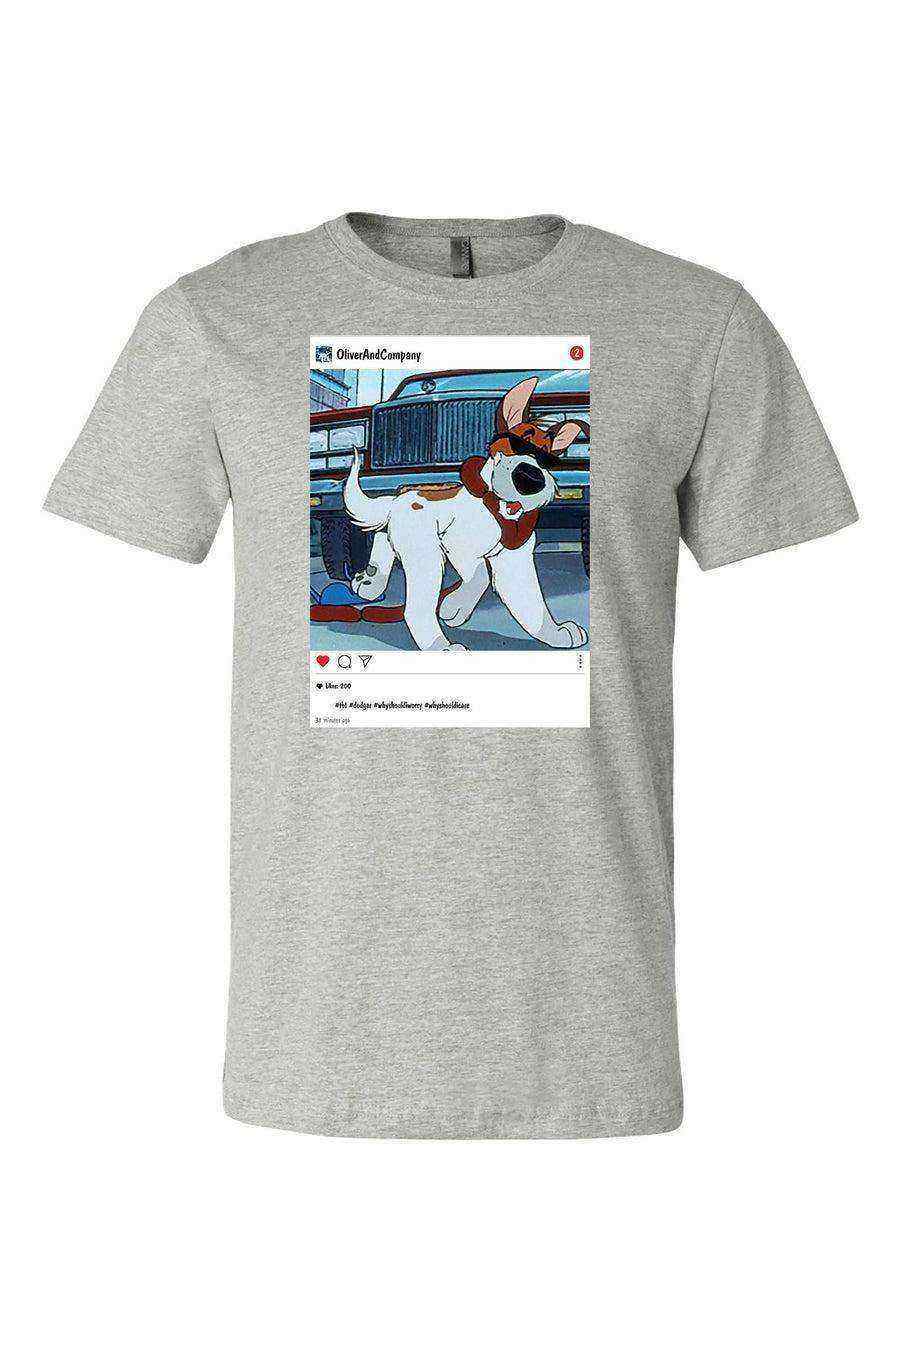 Insta Throw Back Shirt | Oliver And Company - Dylan's Tees